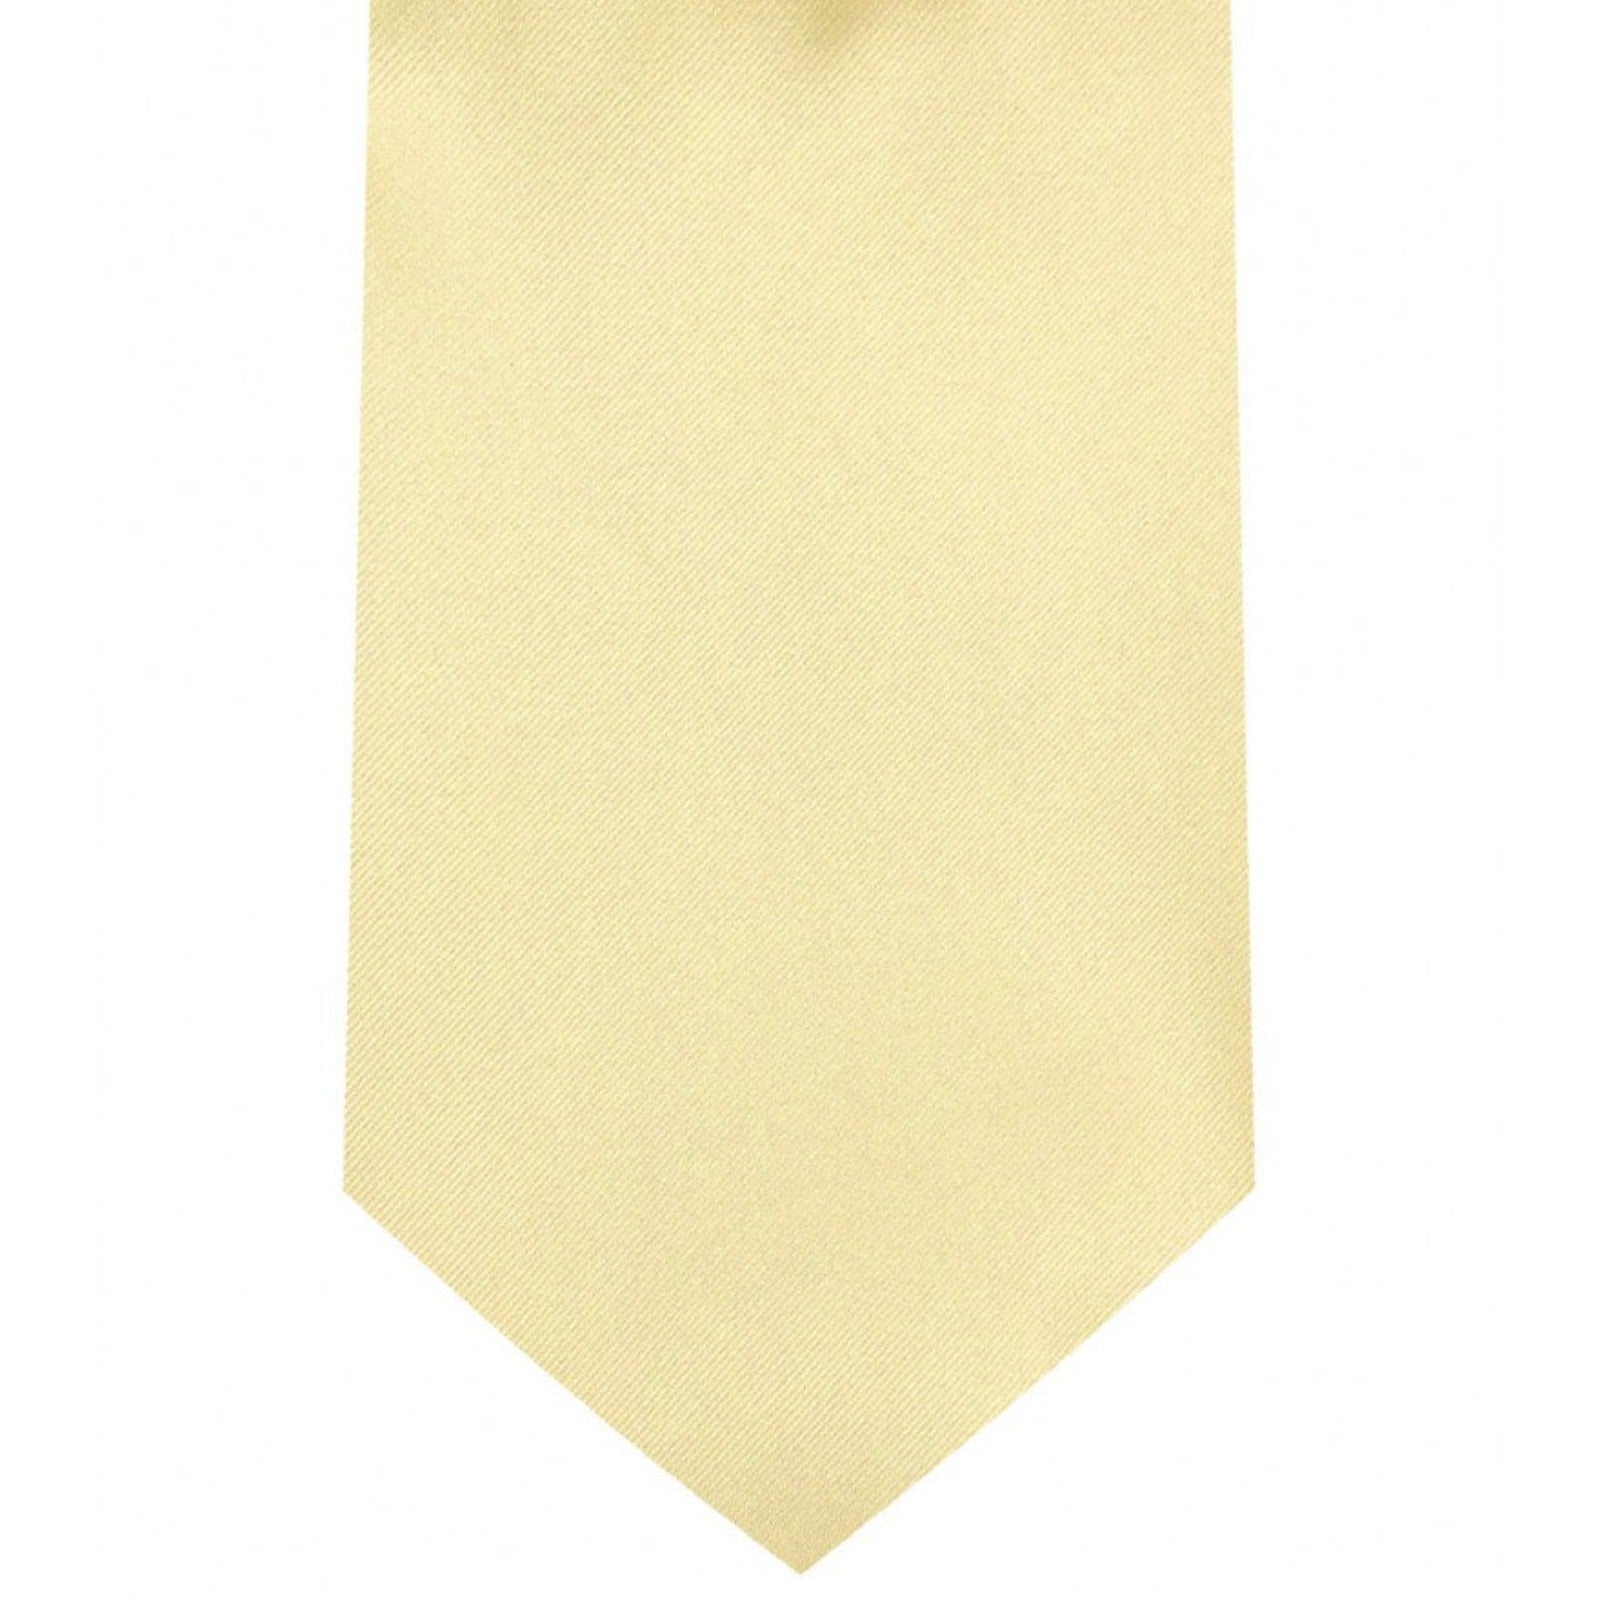 Classic Canary Tie Regular width 3.5 inches With Matching Pocket Square | KCT Menswear 